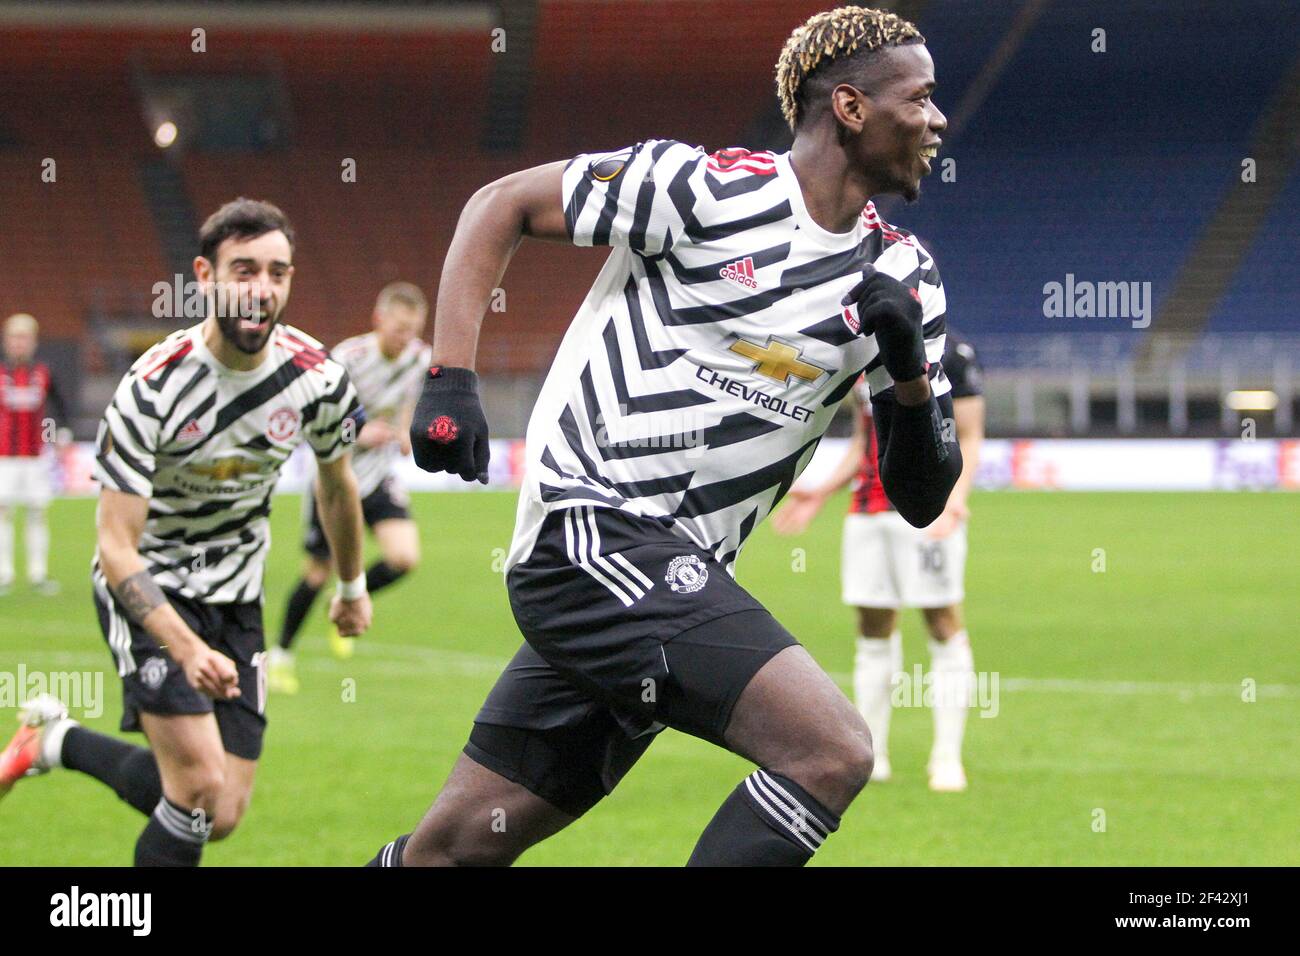 Milan, Italy. 18th Mar, 2021. MILAN, ITALY - MARCH 18: goal by Paul Pogba of Manchester United FC during the UEFA Europa League match between AC Milan and Manchester United FC at Stadio San Siro on March 18, 2021 in Milan, Italy (Photo by Ciro Santangelo/Orange Pictures) Credit: Orange Pics BV/Alamy Live News Stock Photo